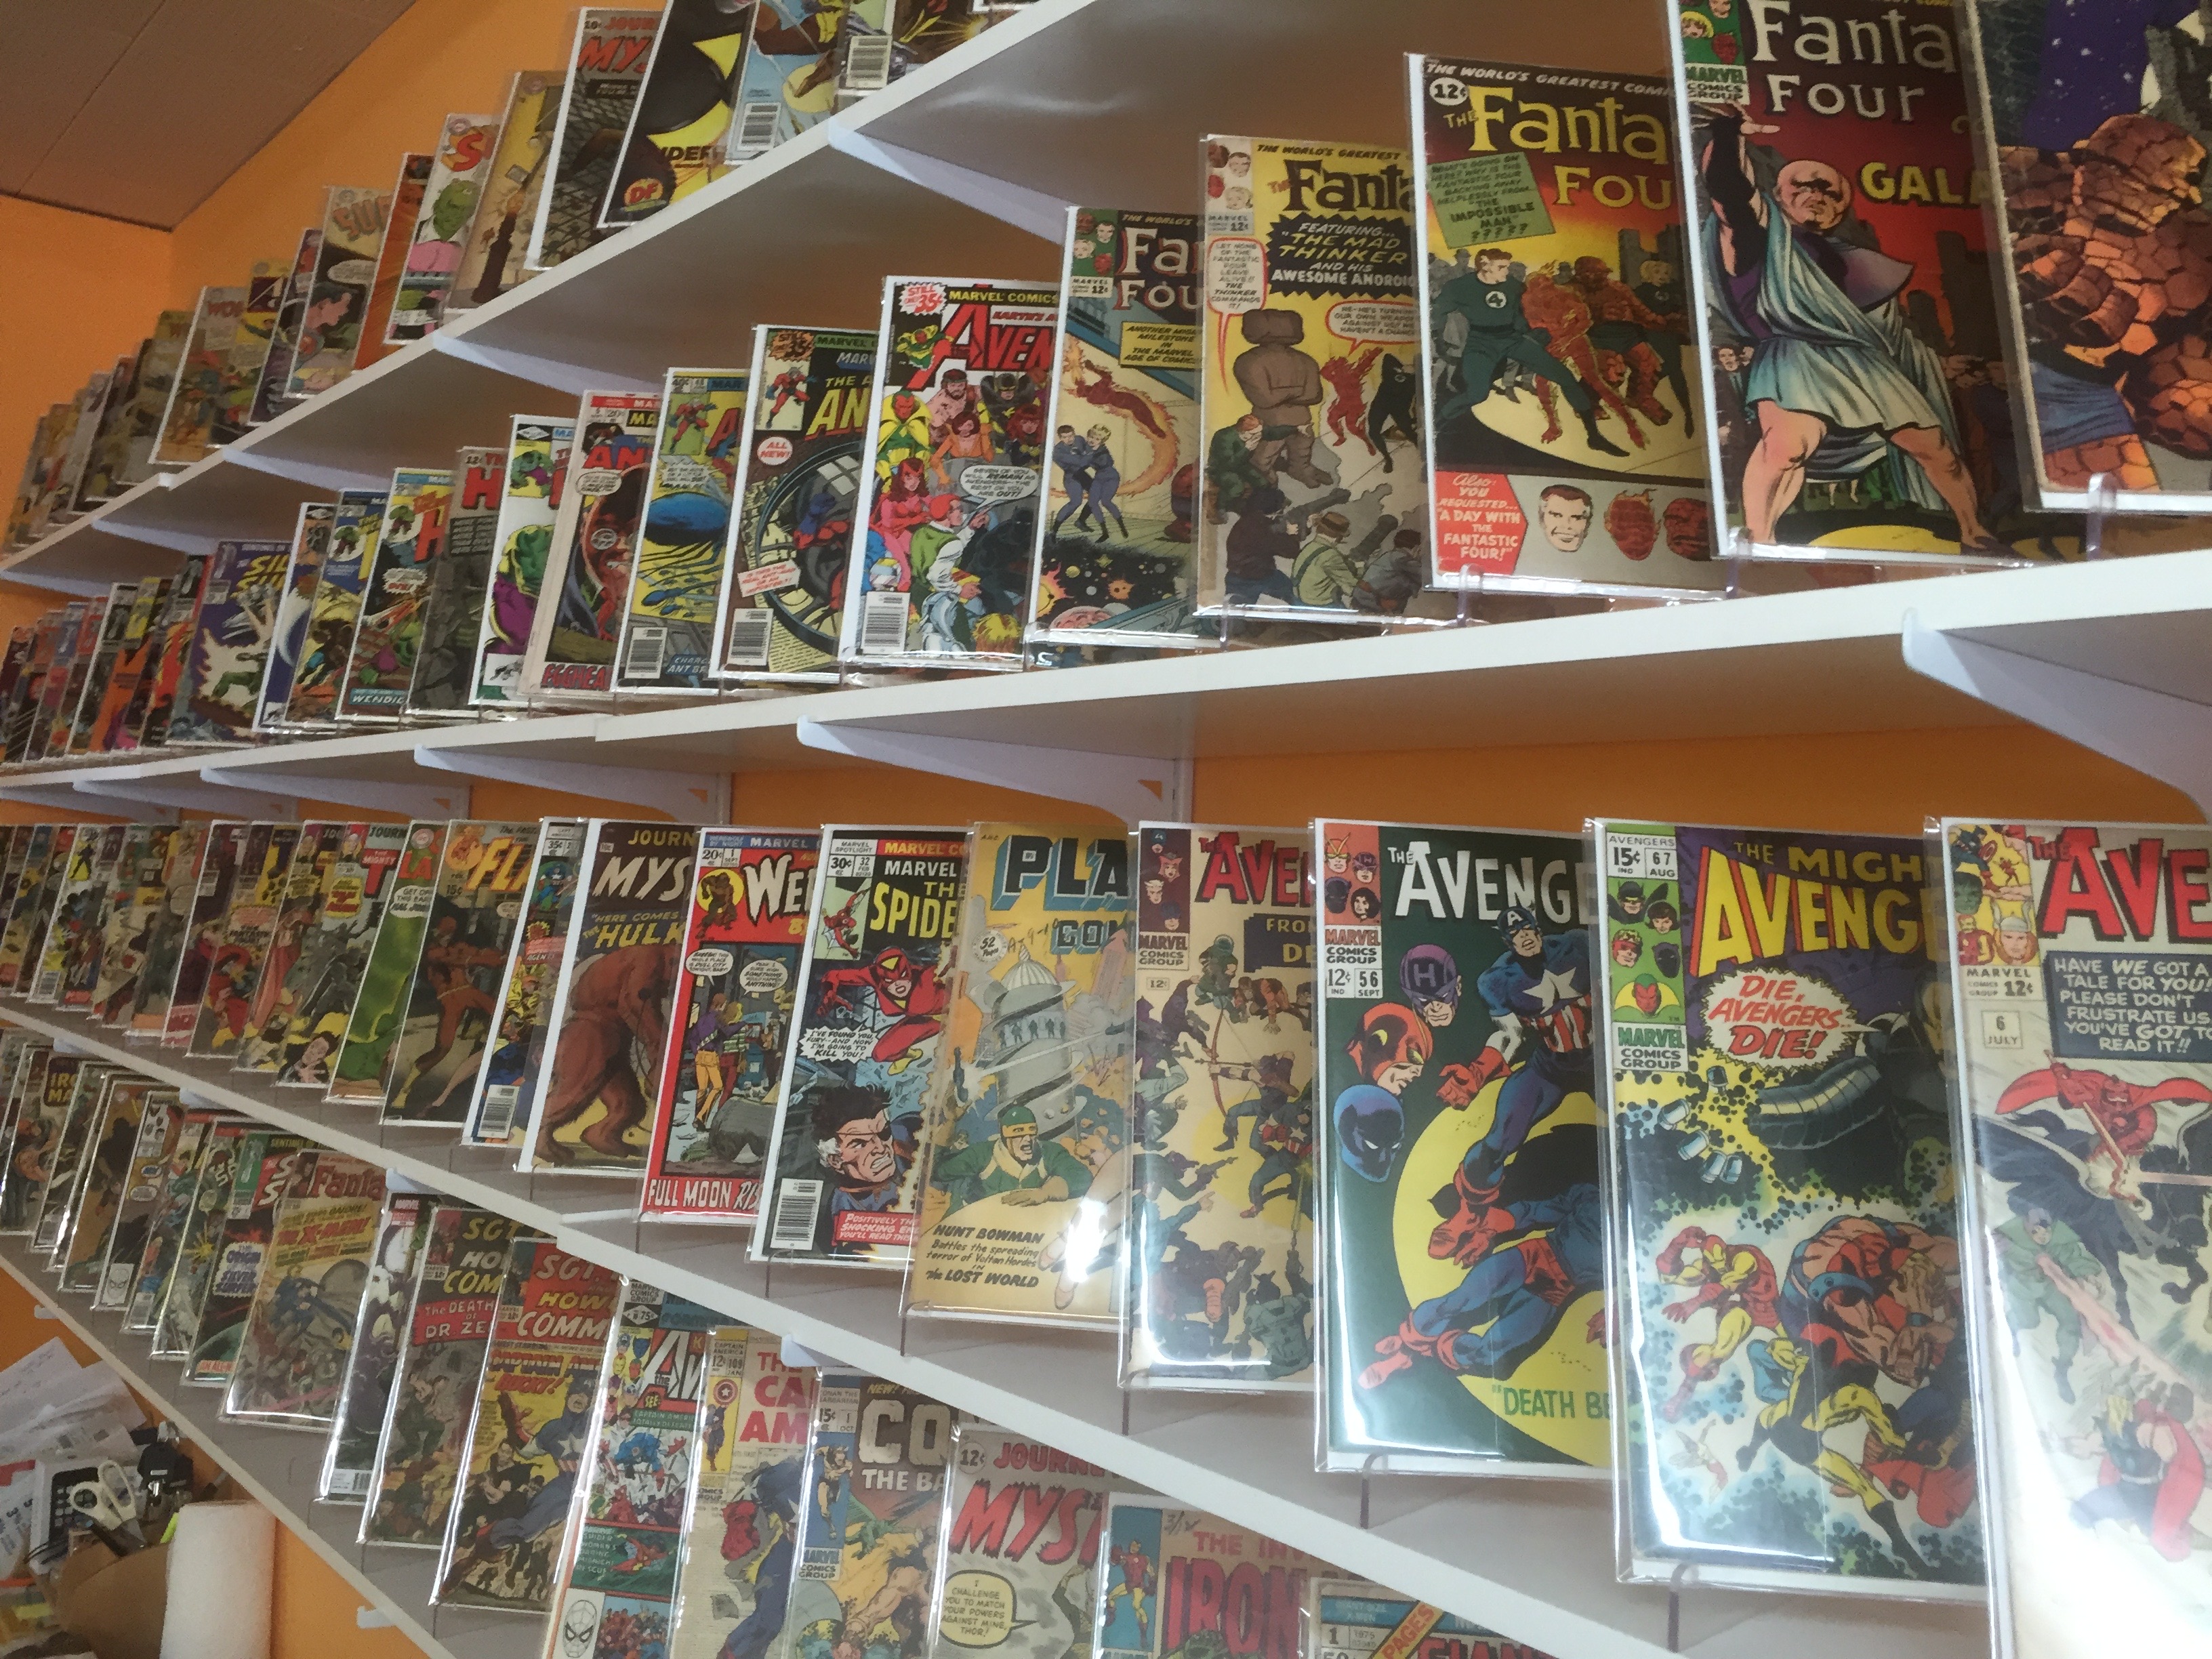 <span  class="uc_style_uc_tiles_grid_image_elementor_uc_items_attribute_title" style="color:#ffffff;">The Back Wall at Mammoth Comics</span>